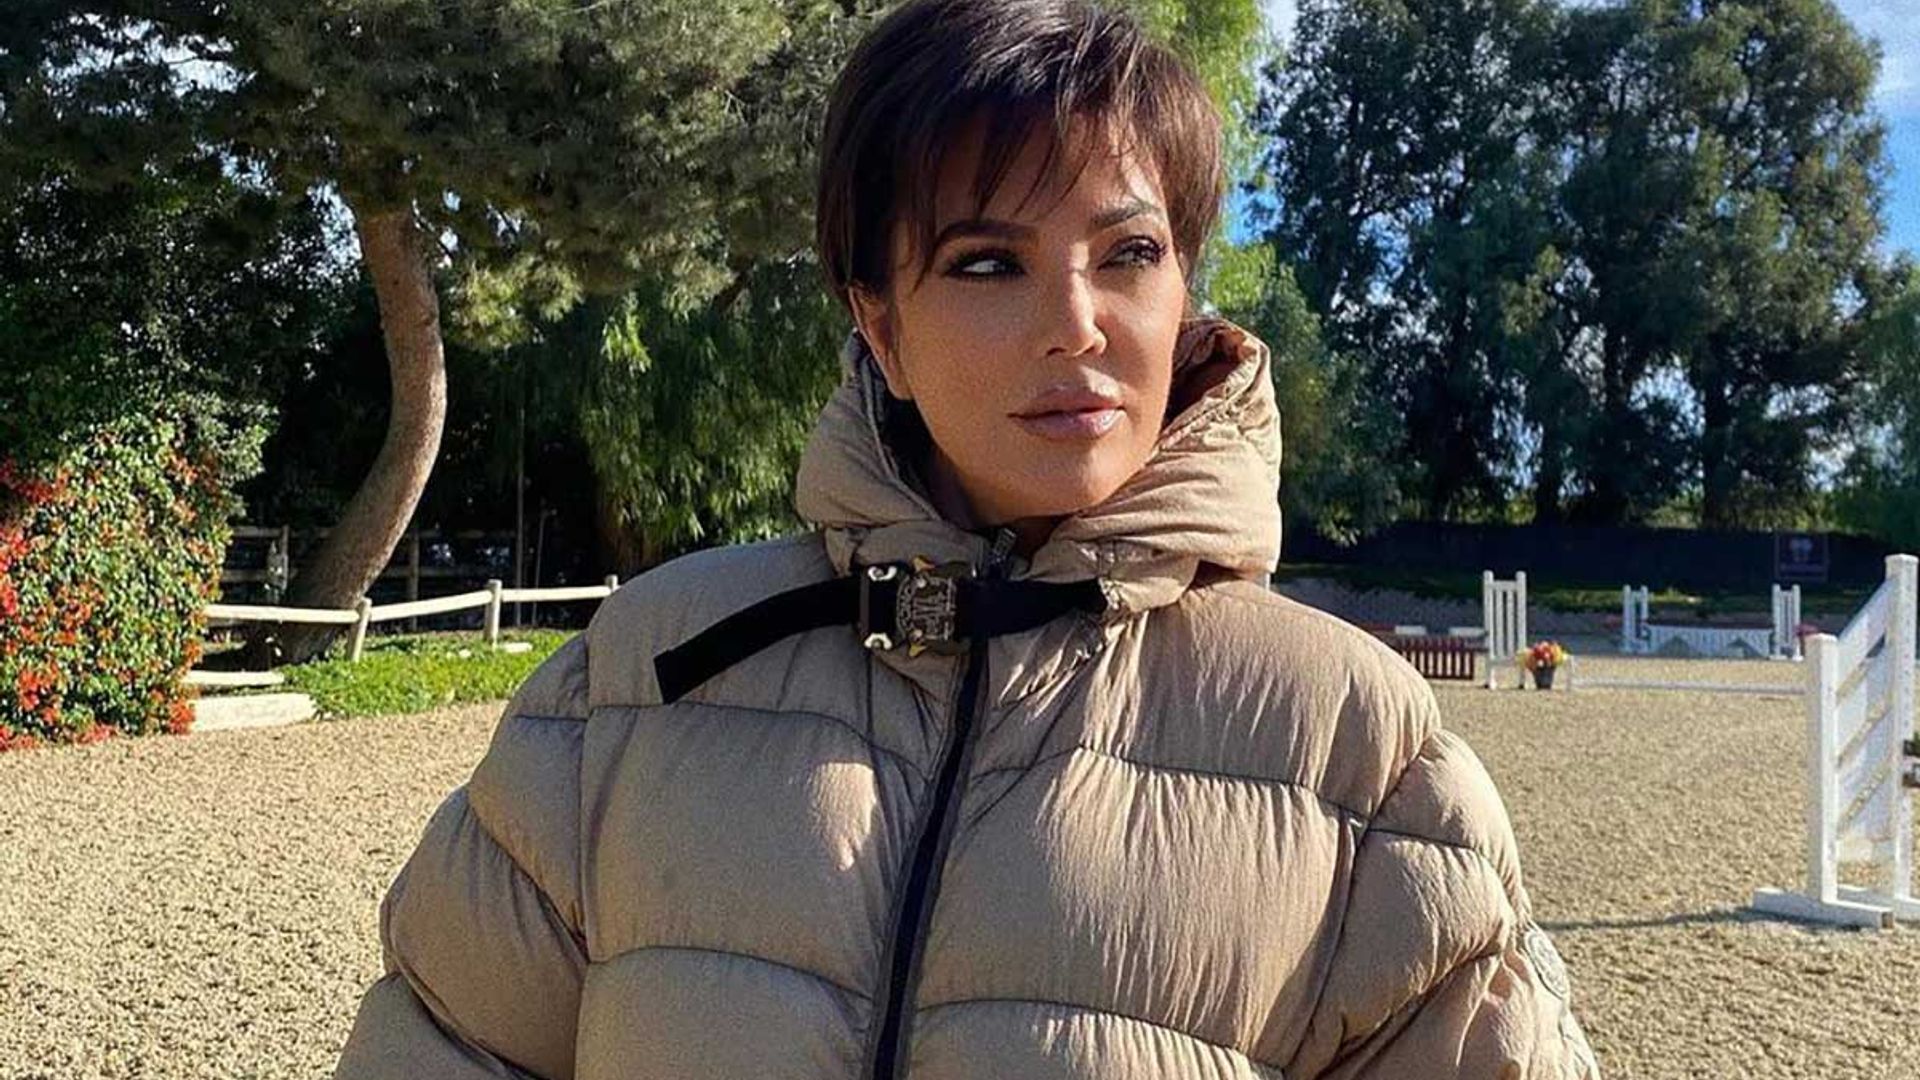 Kris Jenner brought to tears during difficult lead up to Christmas